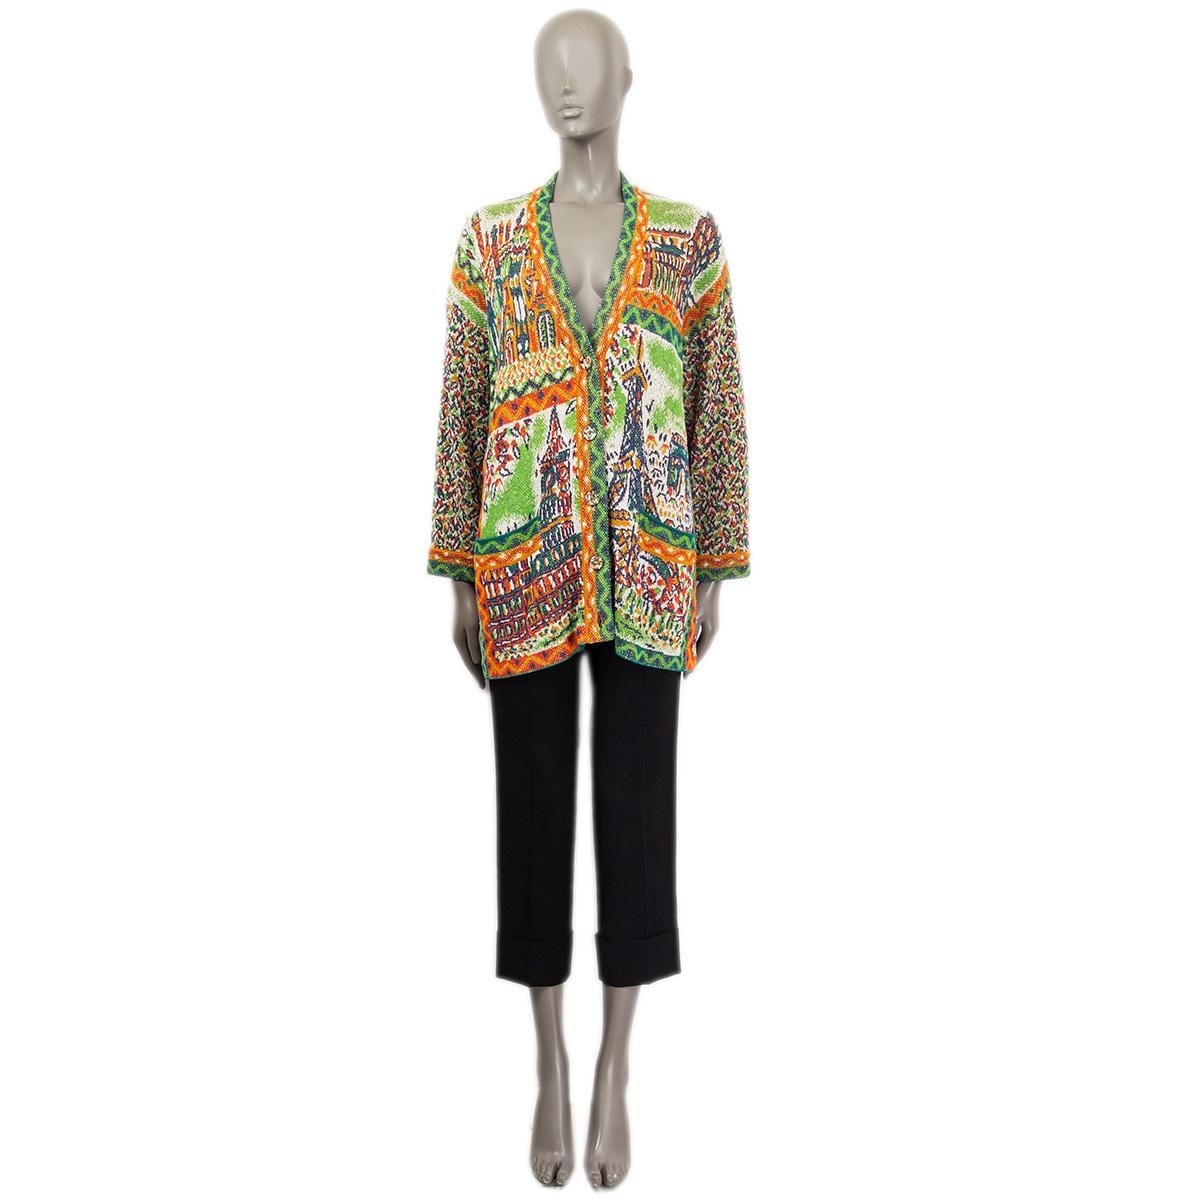 100% authentic Missoni knit cardigan in green, orange, off-white and red cotton (85%) and nylon (15%). Two slit pockets on the front. Closes with multi-colored buttons on the front. Unlined. Has been worn and is in excellent